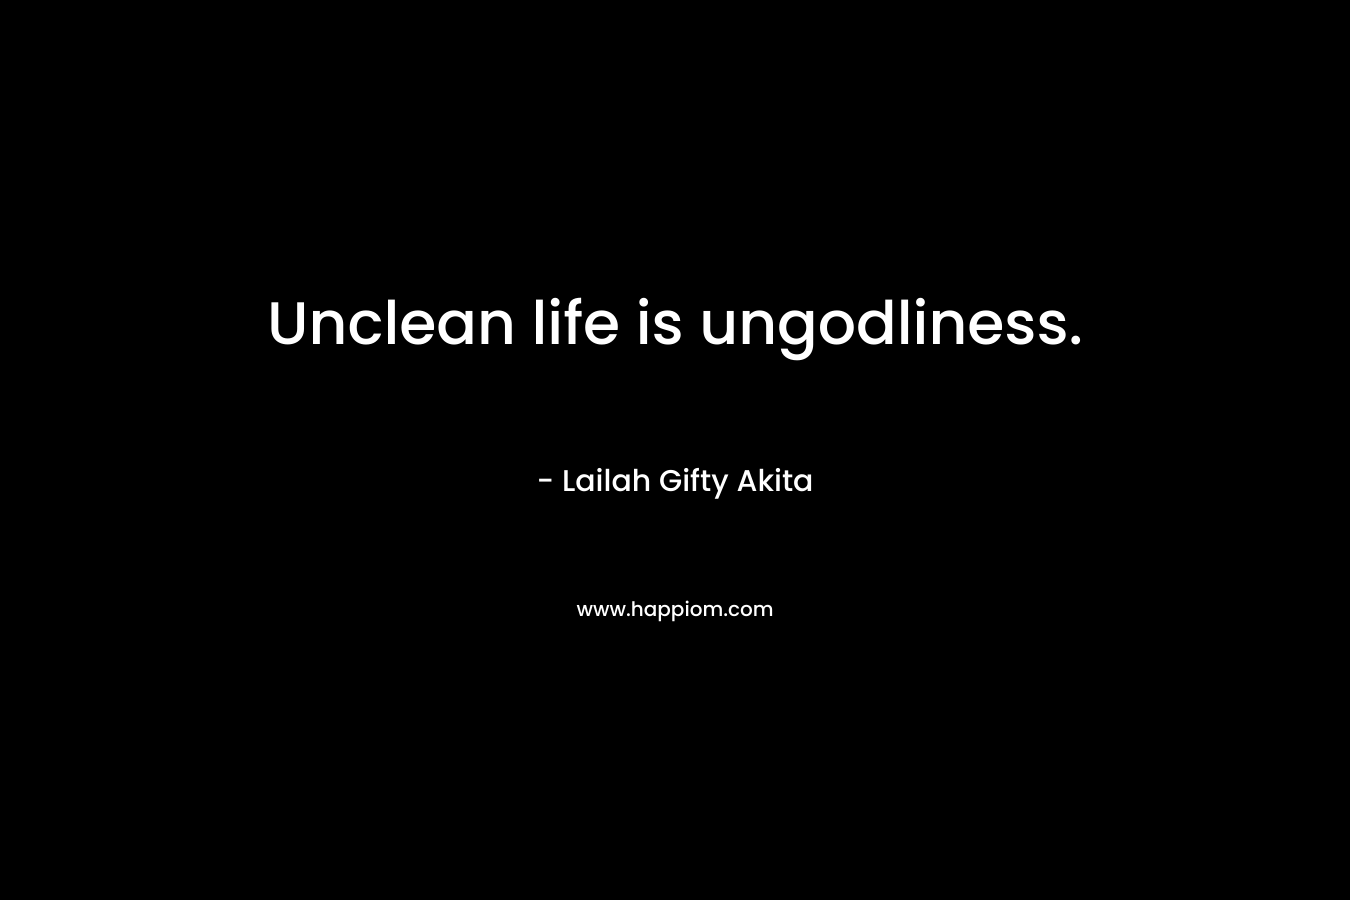 Unclean life is ungodliness.